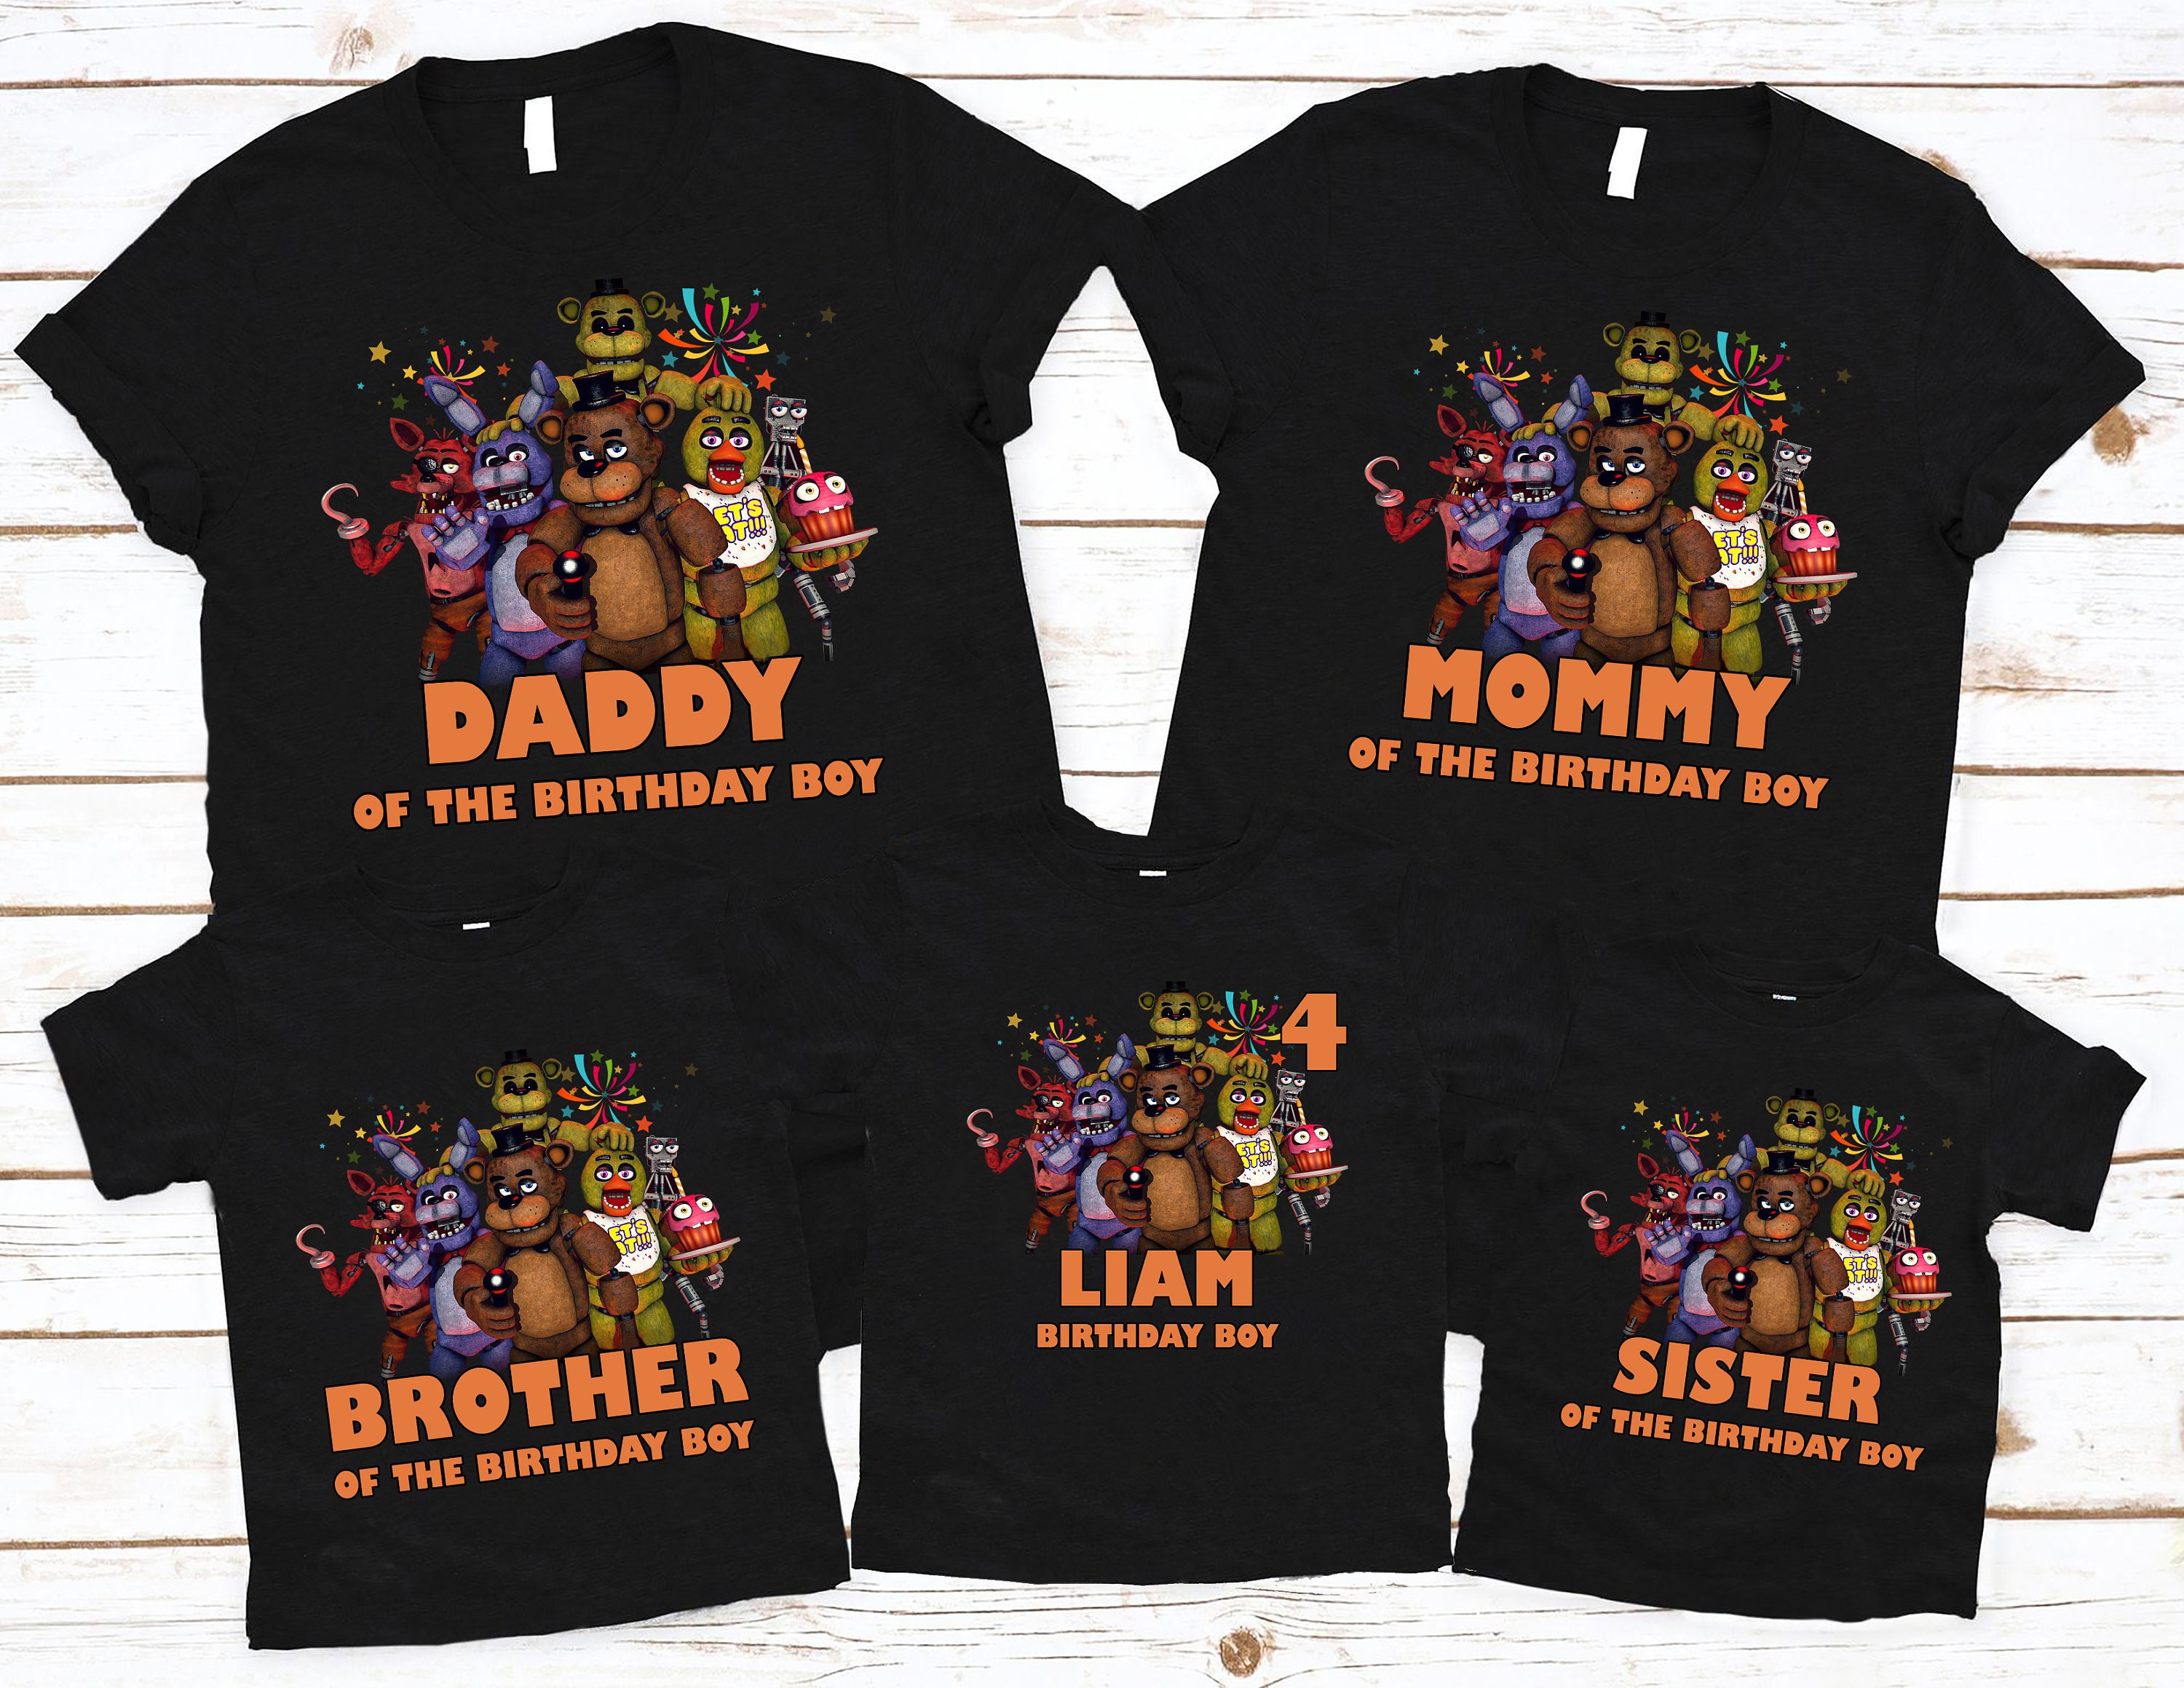 Five Nights at Freddy's Characters and Cameras Boy's Black Long Sleeve  Shirt-M 